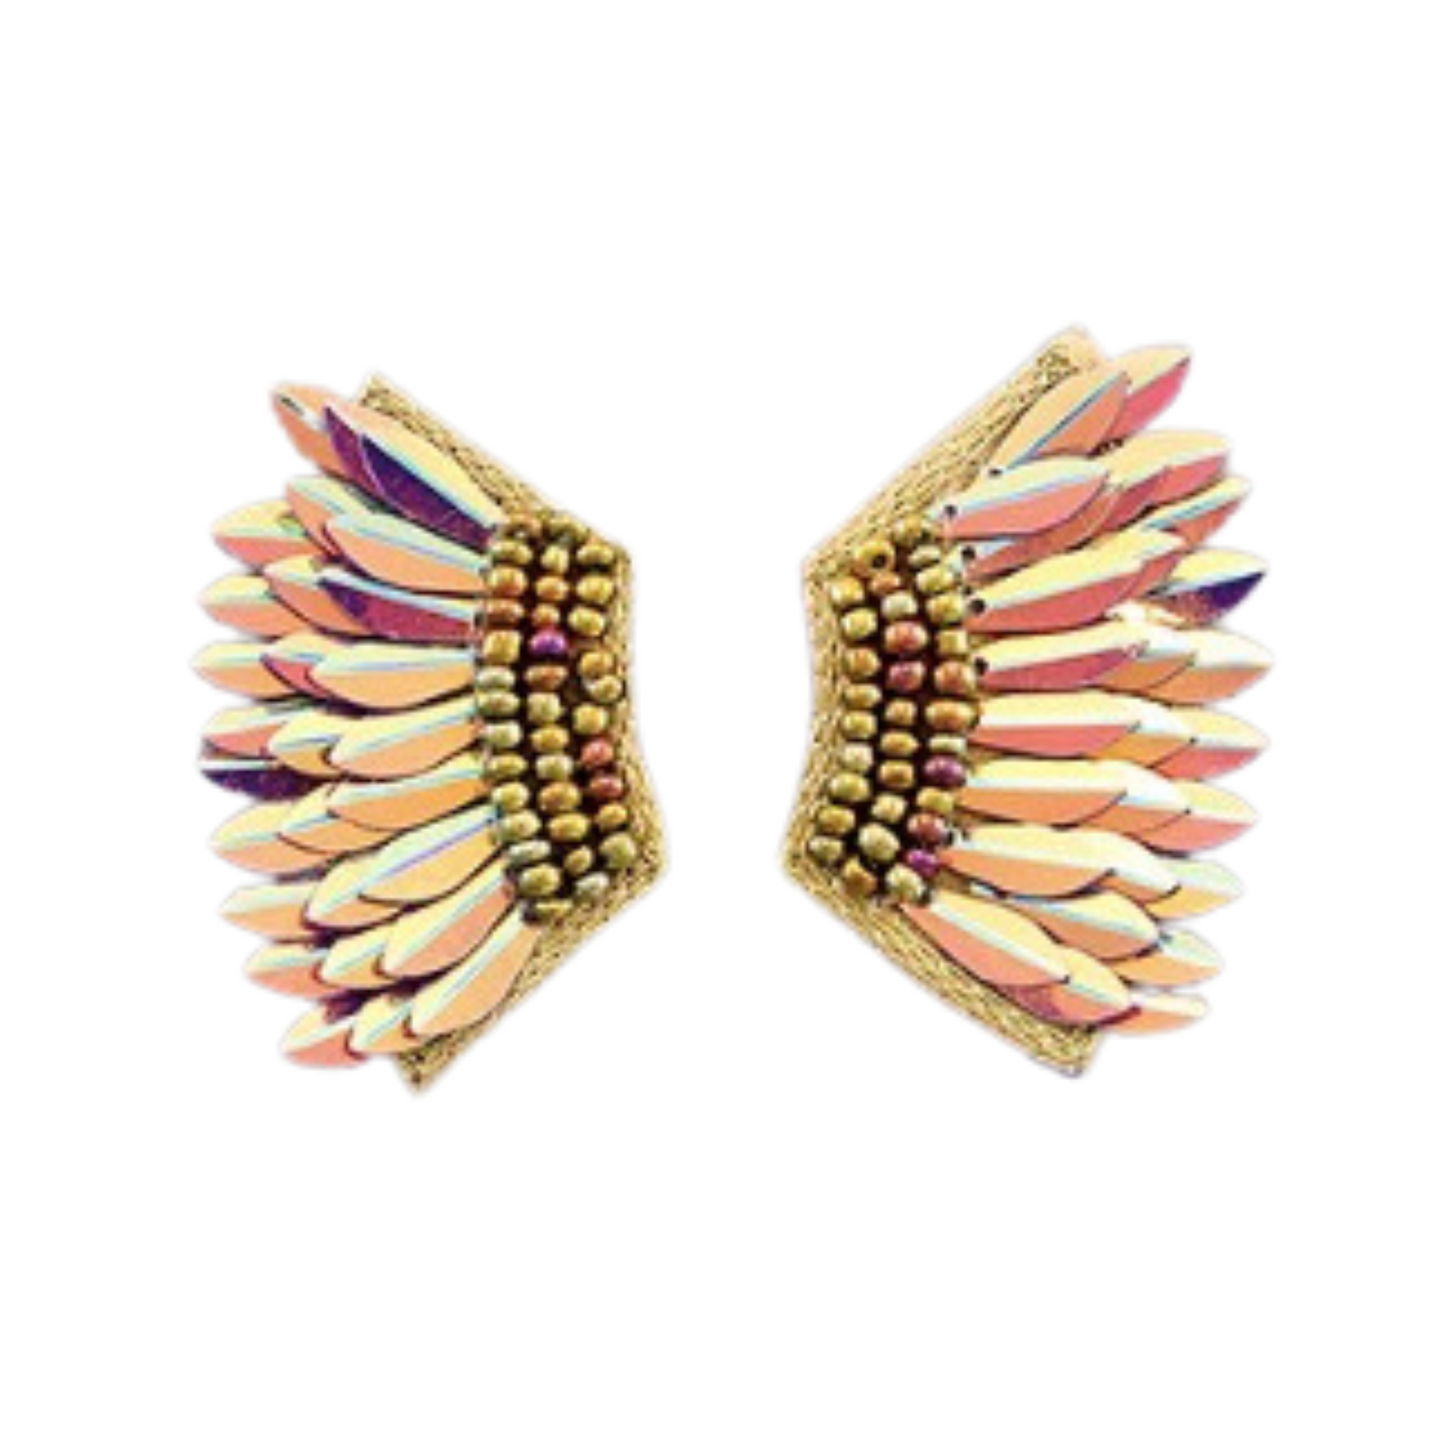 Iridescent angel wing earrings in pink